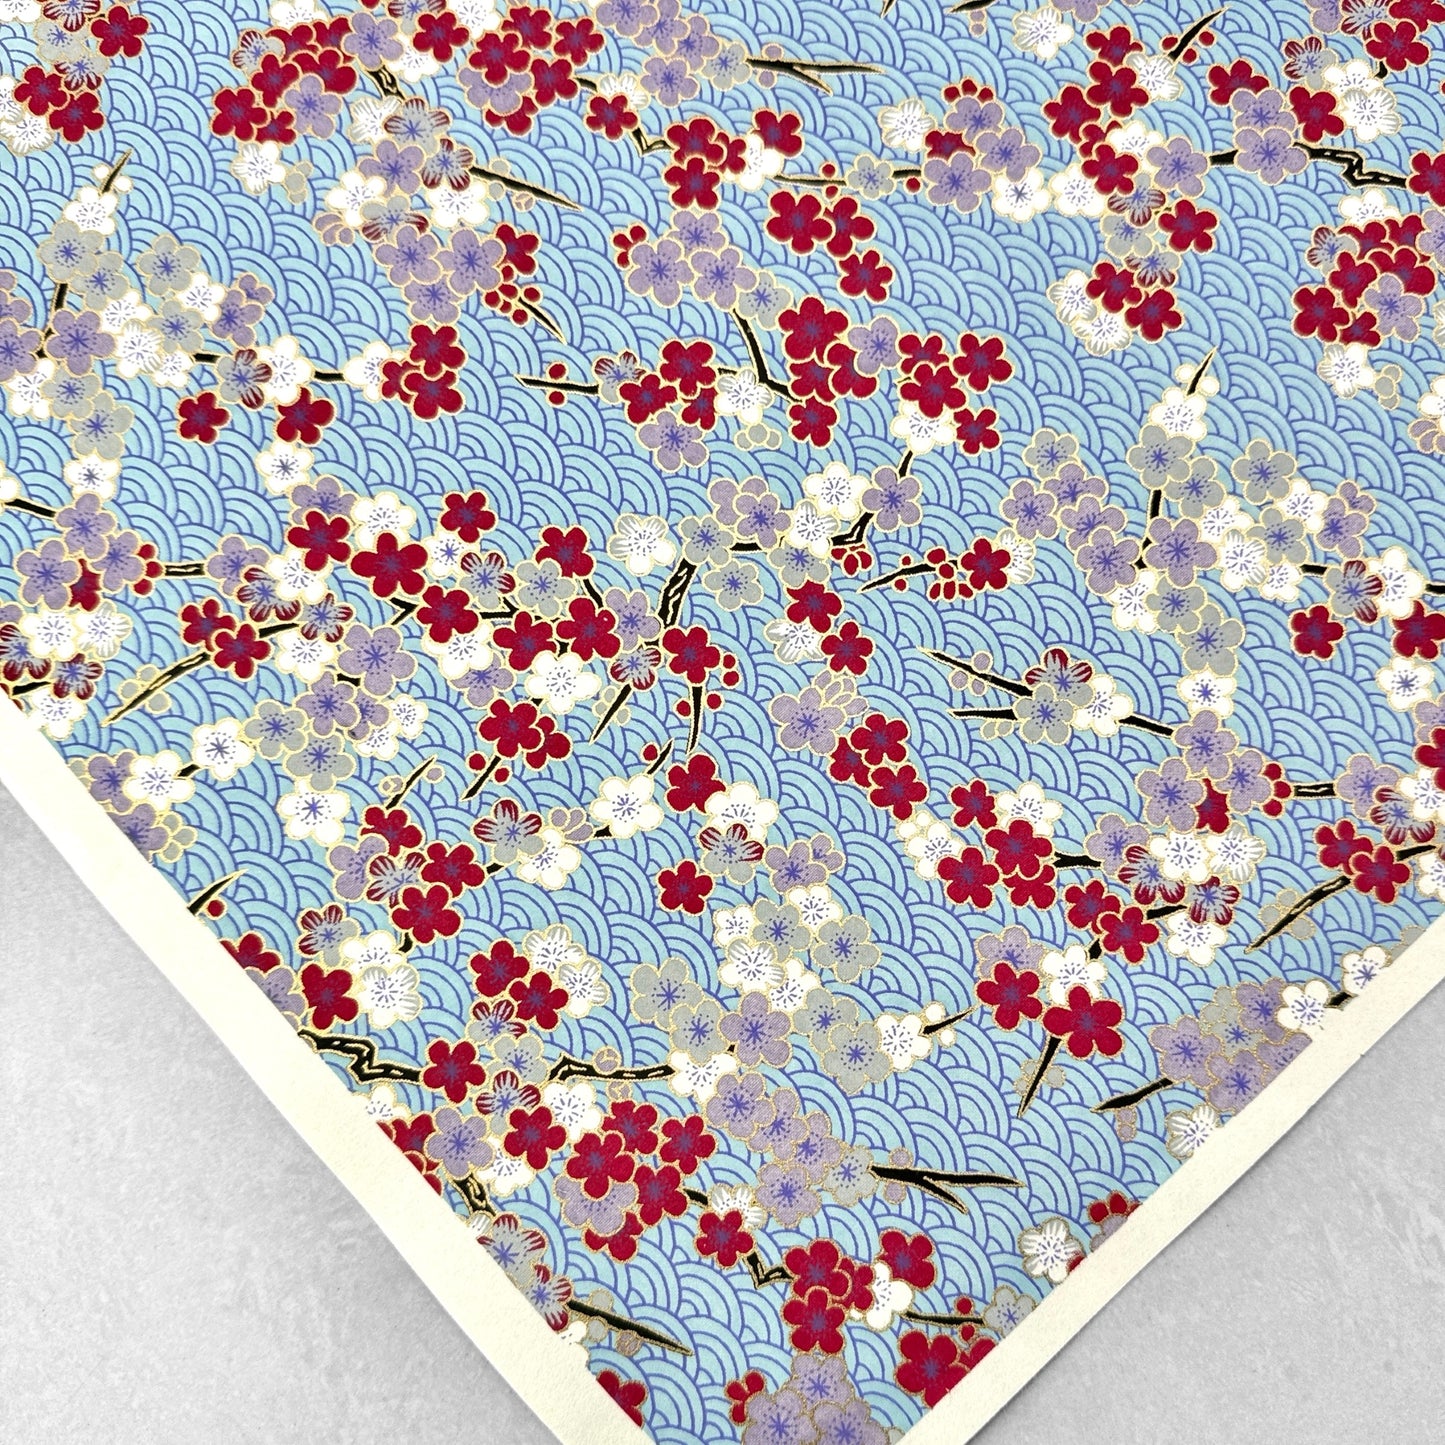 Japanese silkscreen chiyogami paper with a pattern of deep red, lilac and white plum blossom on a blue backdrop